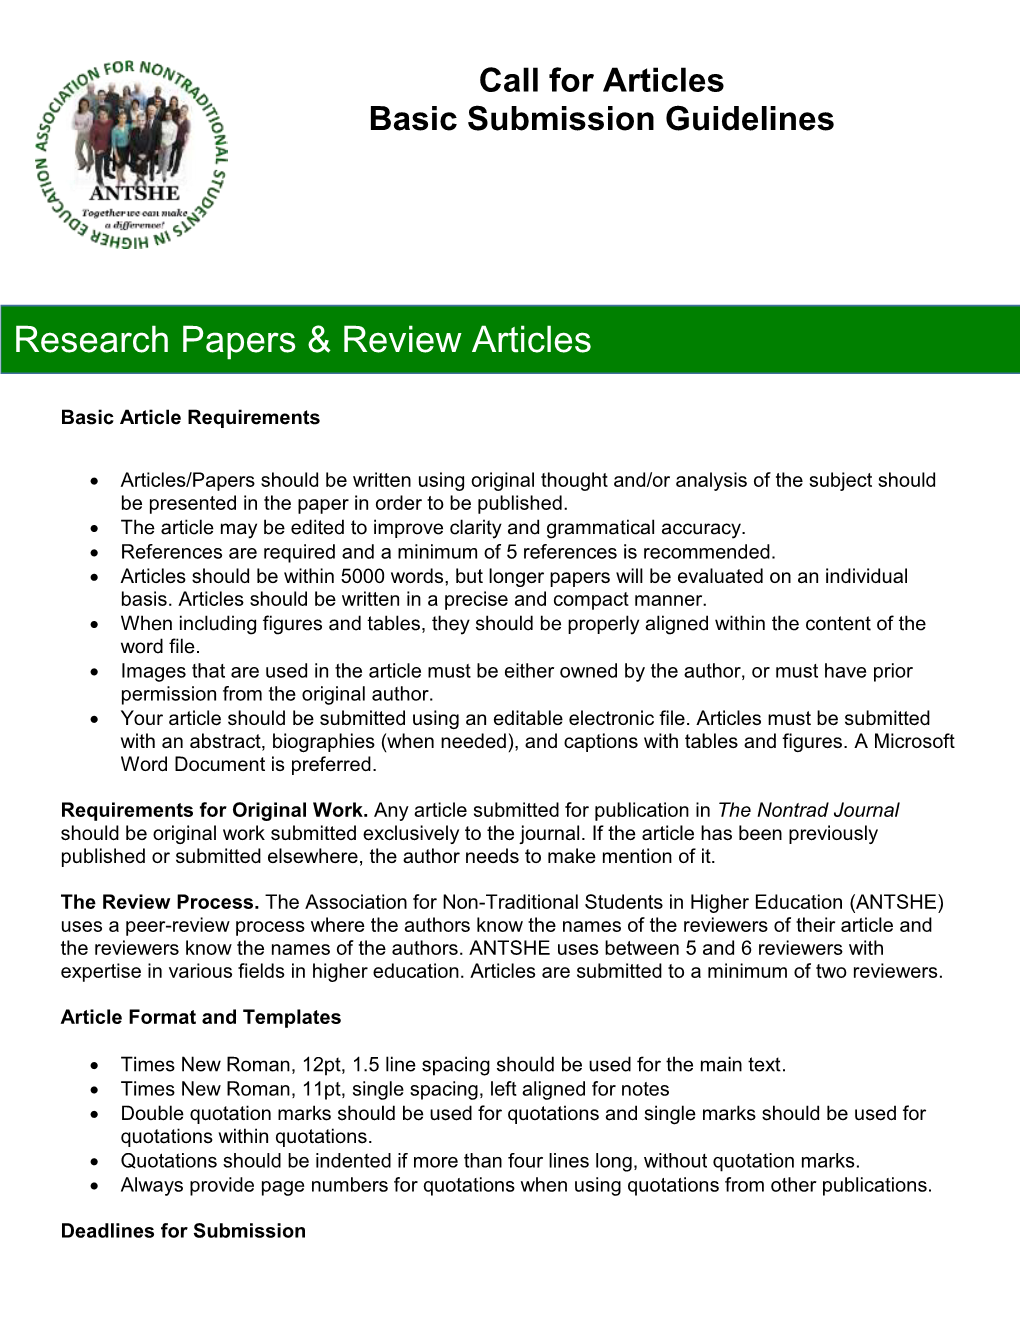 Research Papers & Review Articles